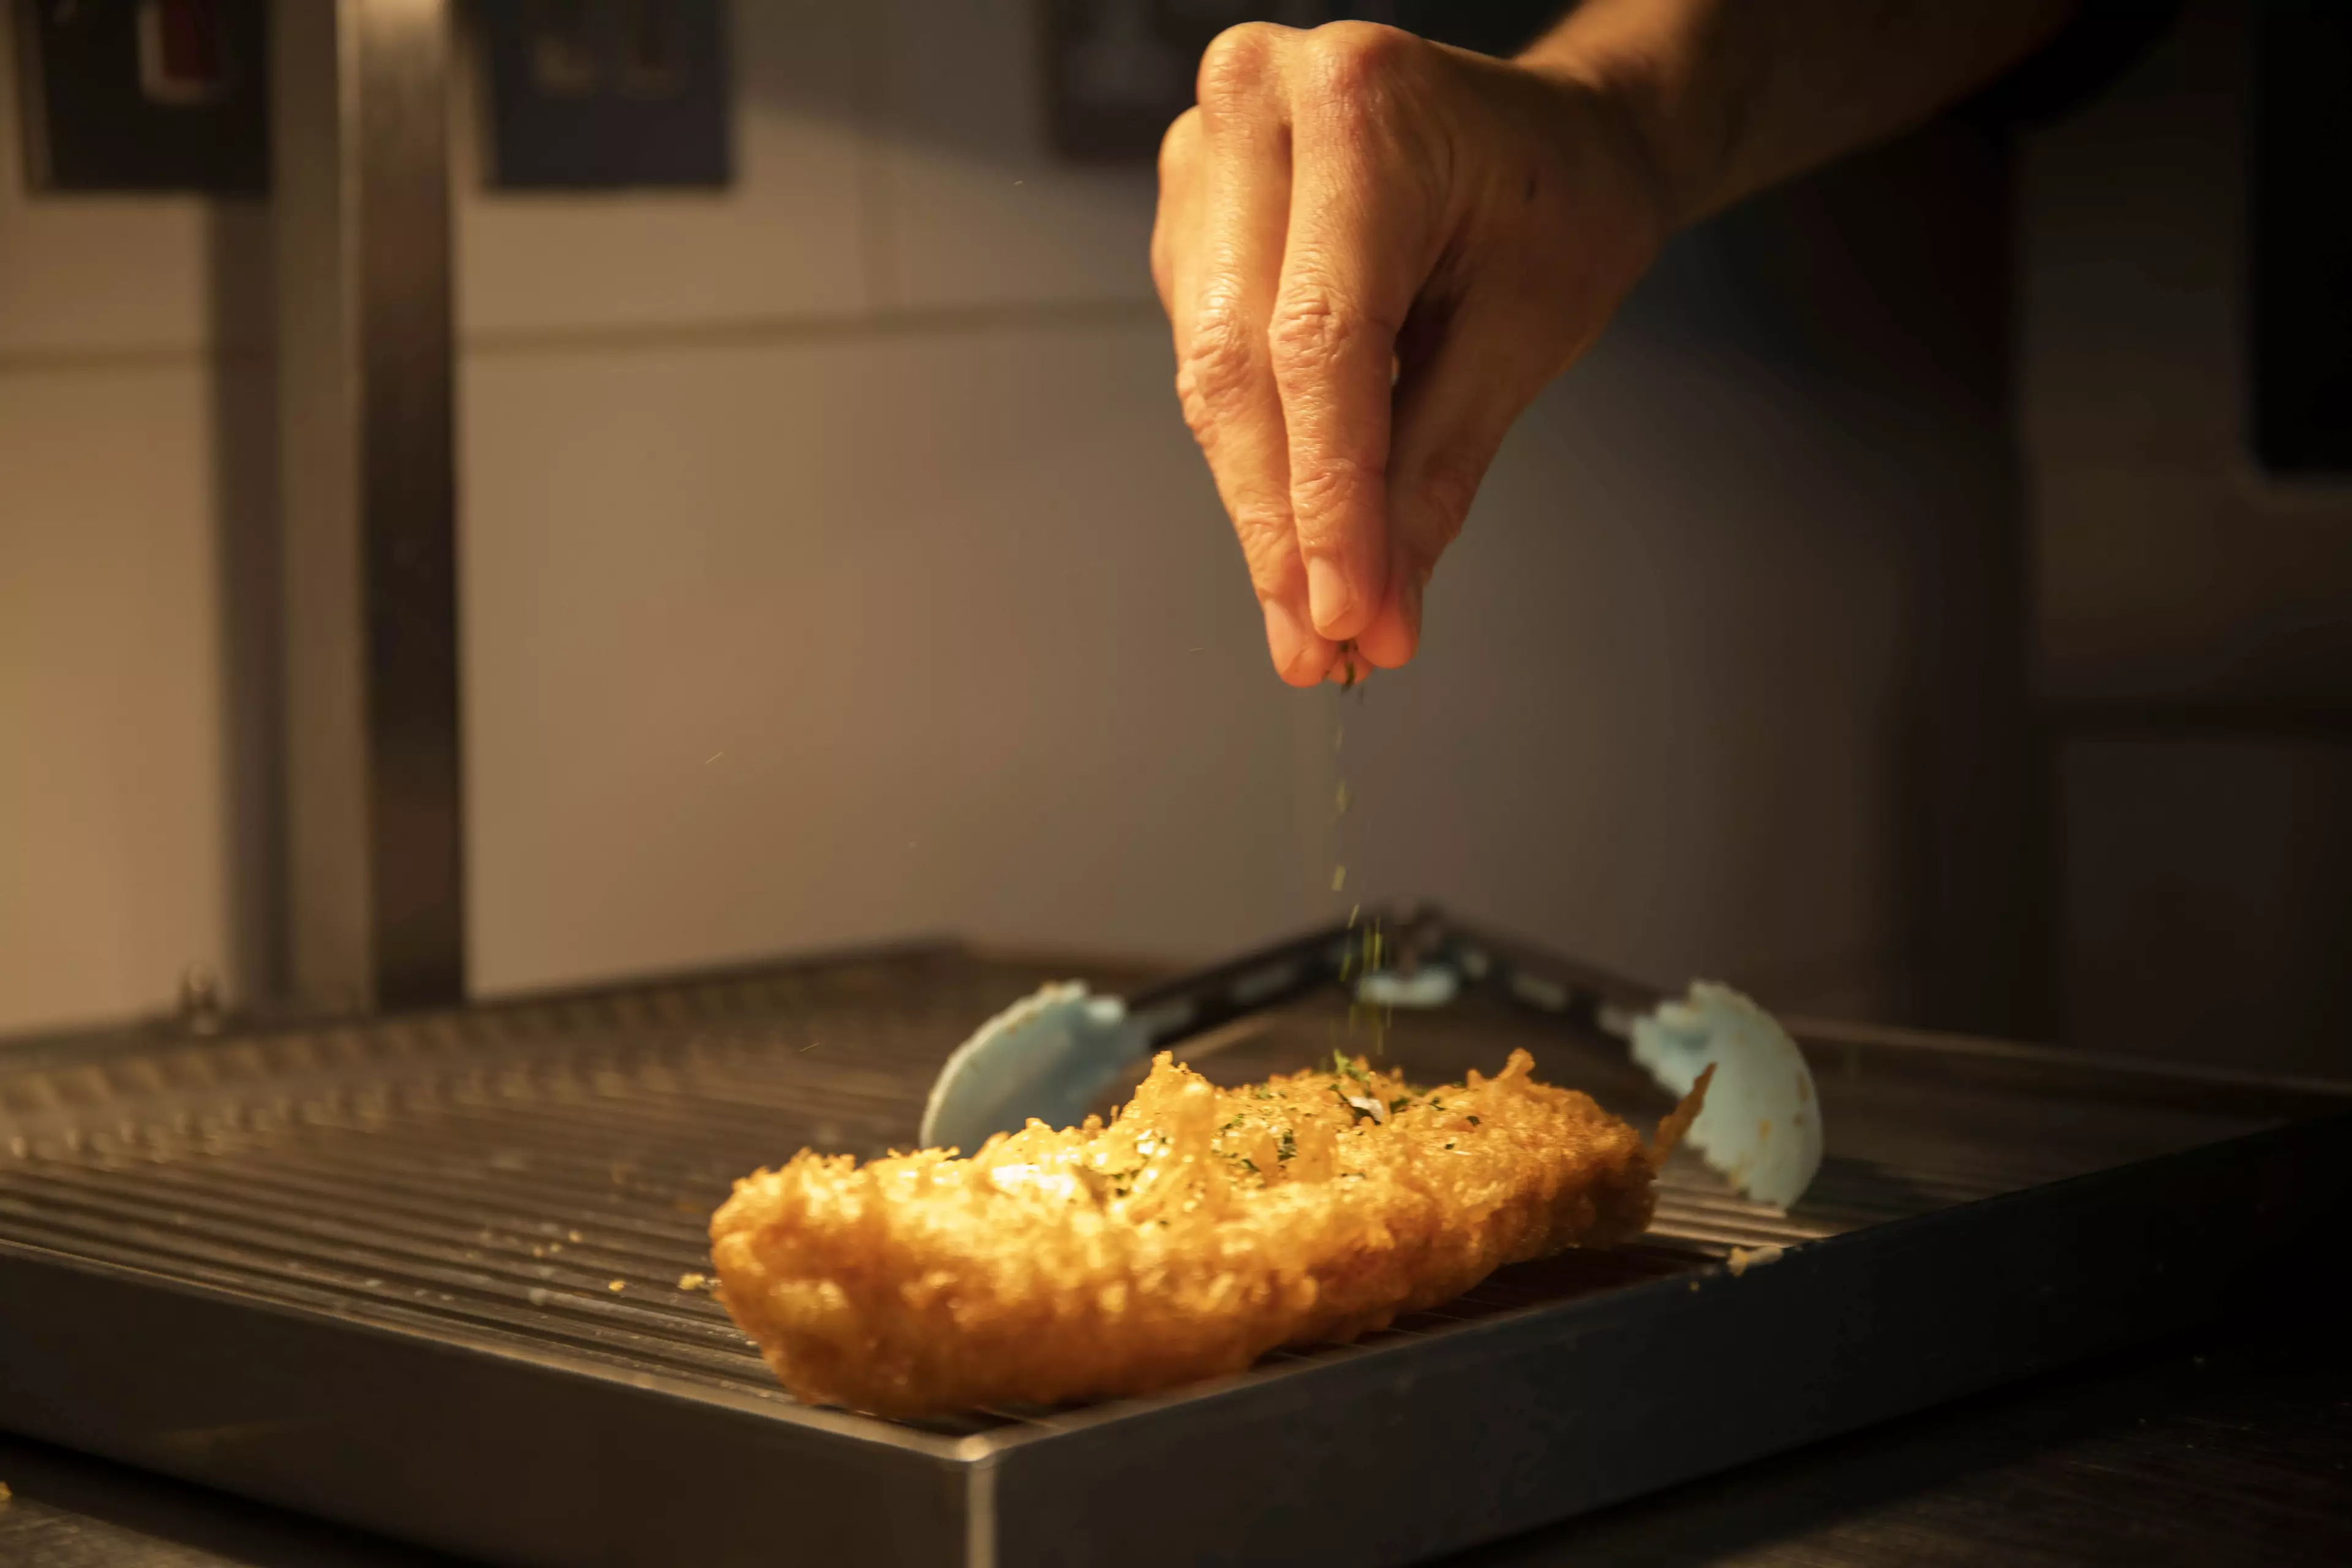 You can upgrade to a fancy beer batter for 50p (